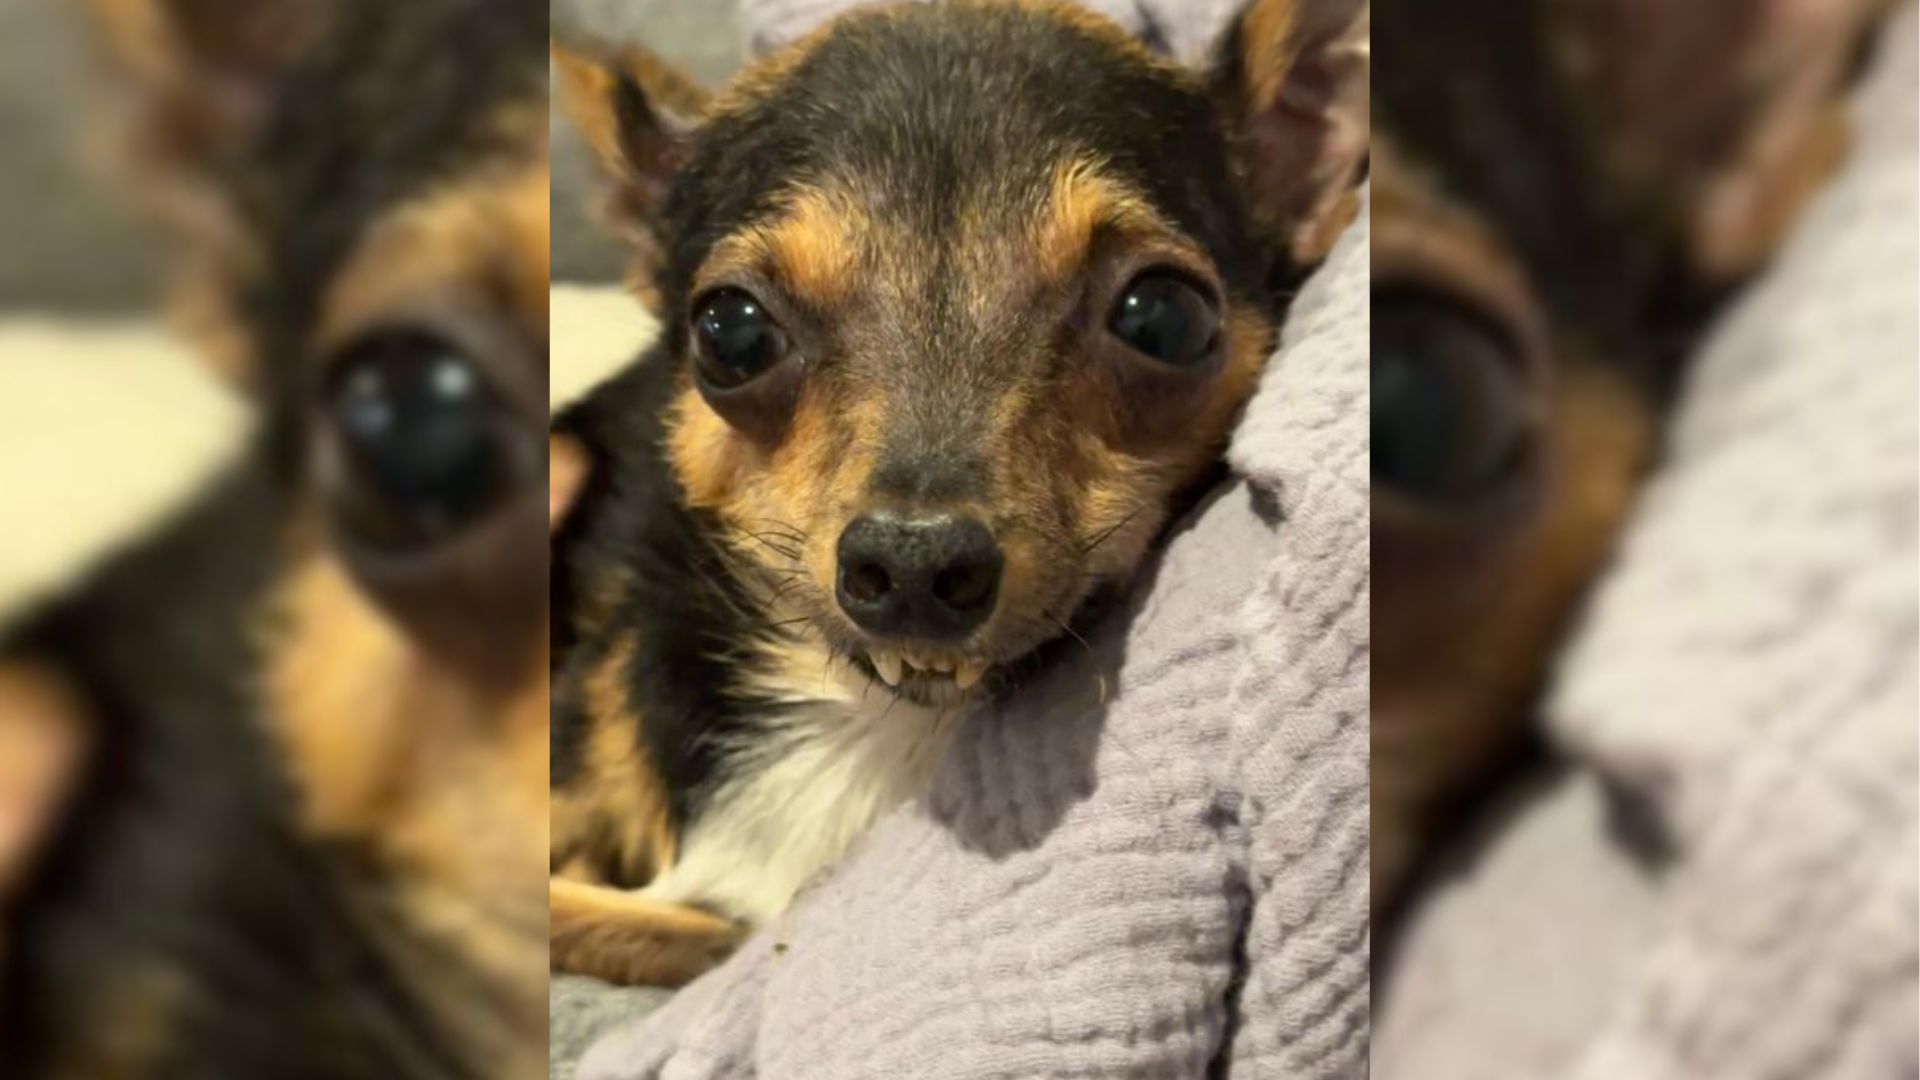 Disabled Pup Has The Most Adorable Response When He Hears His Mom Say “I Love You”